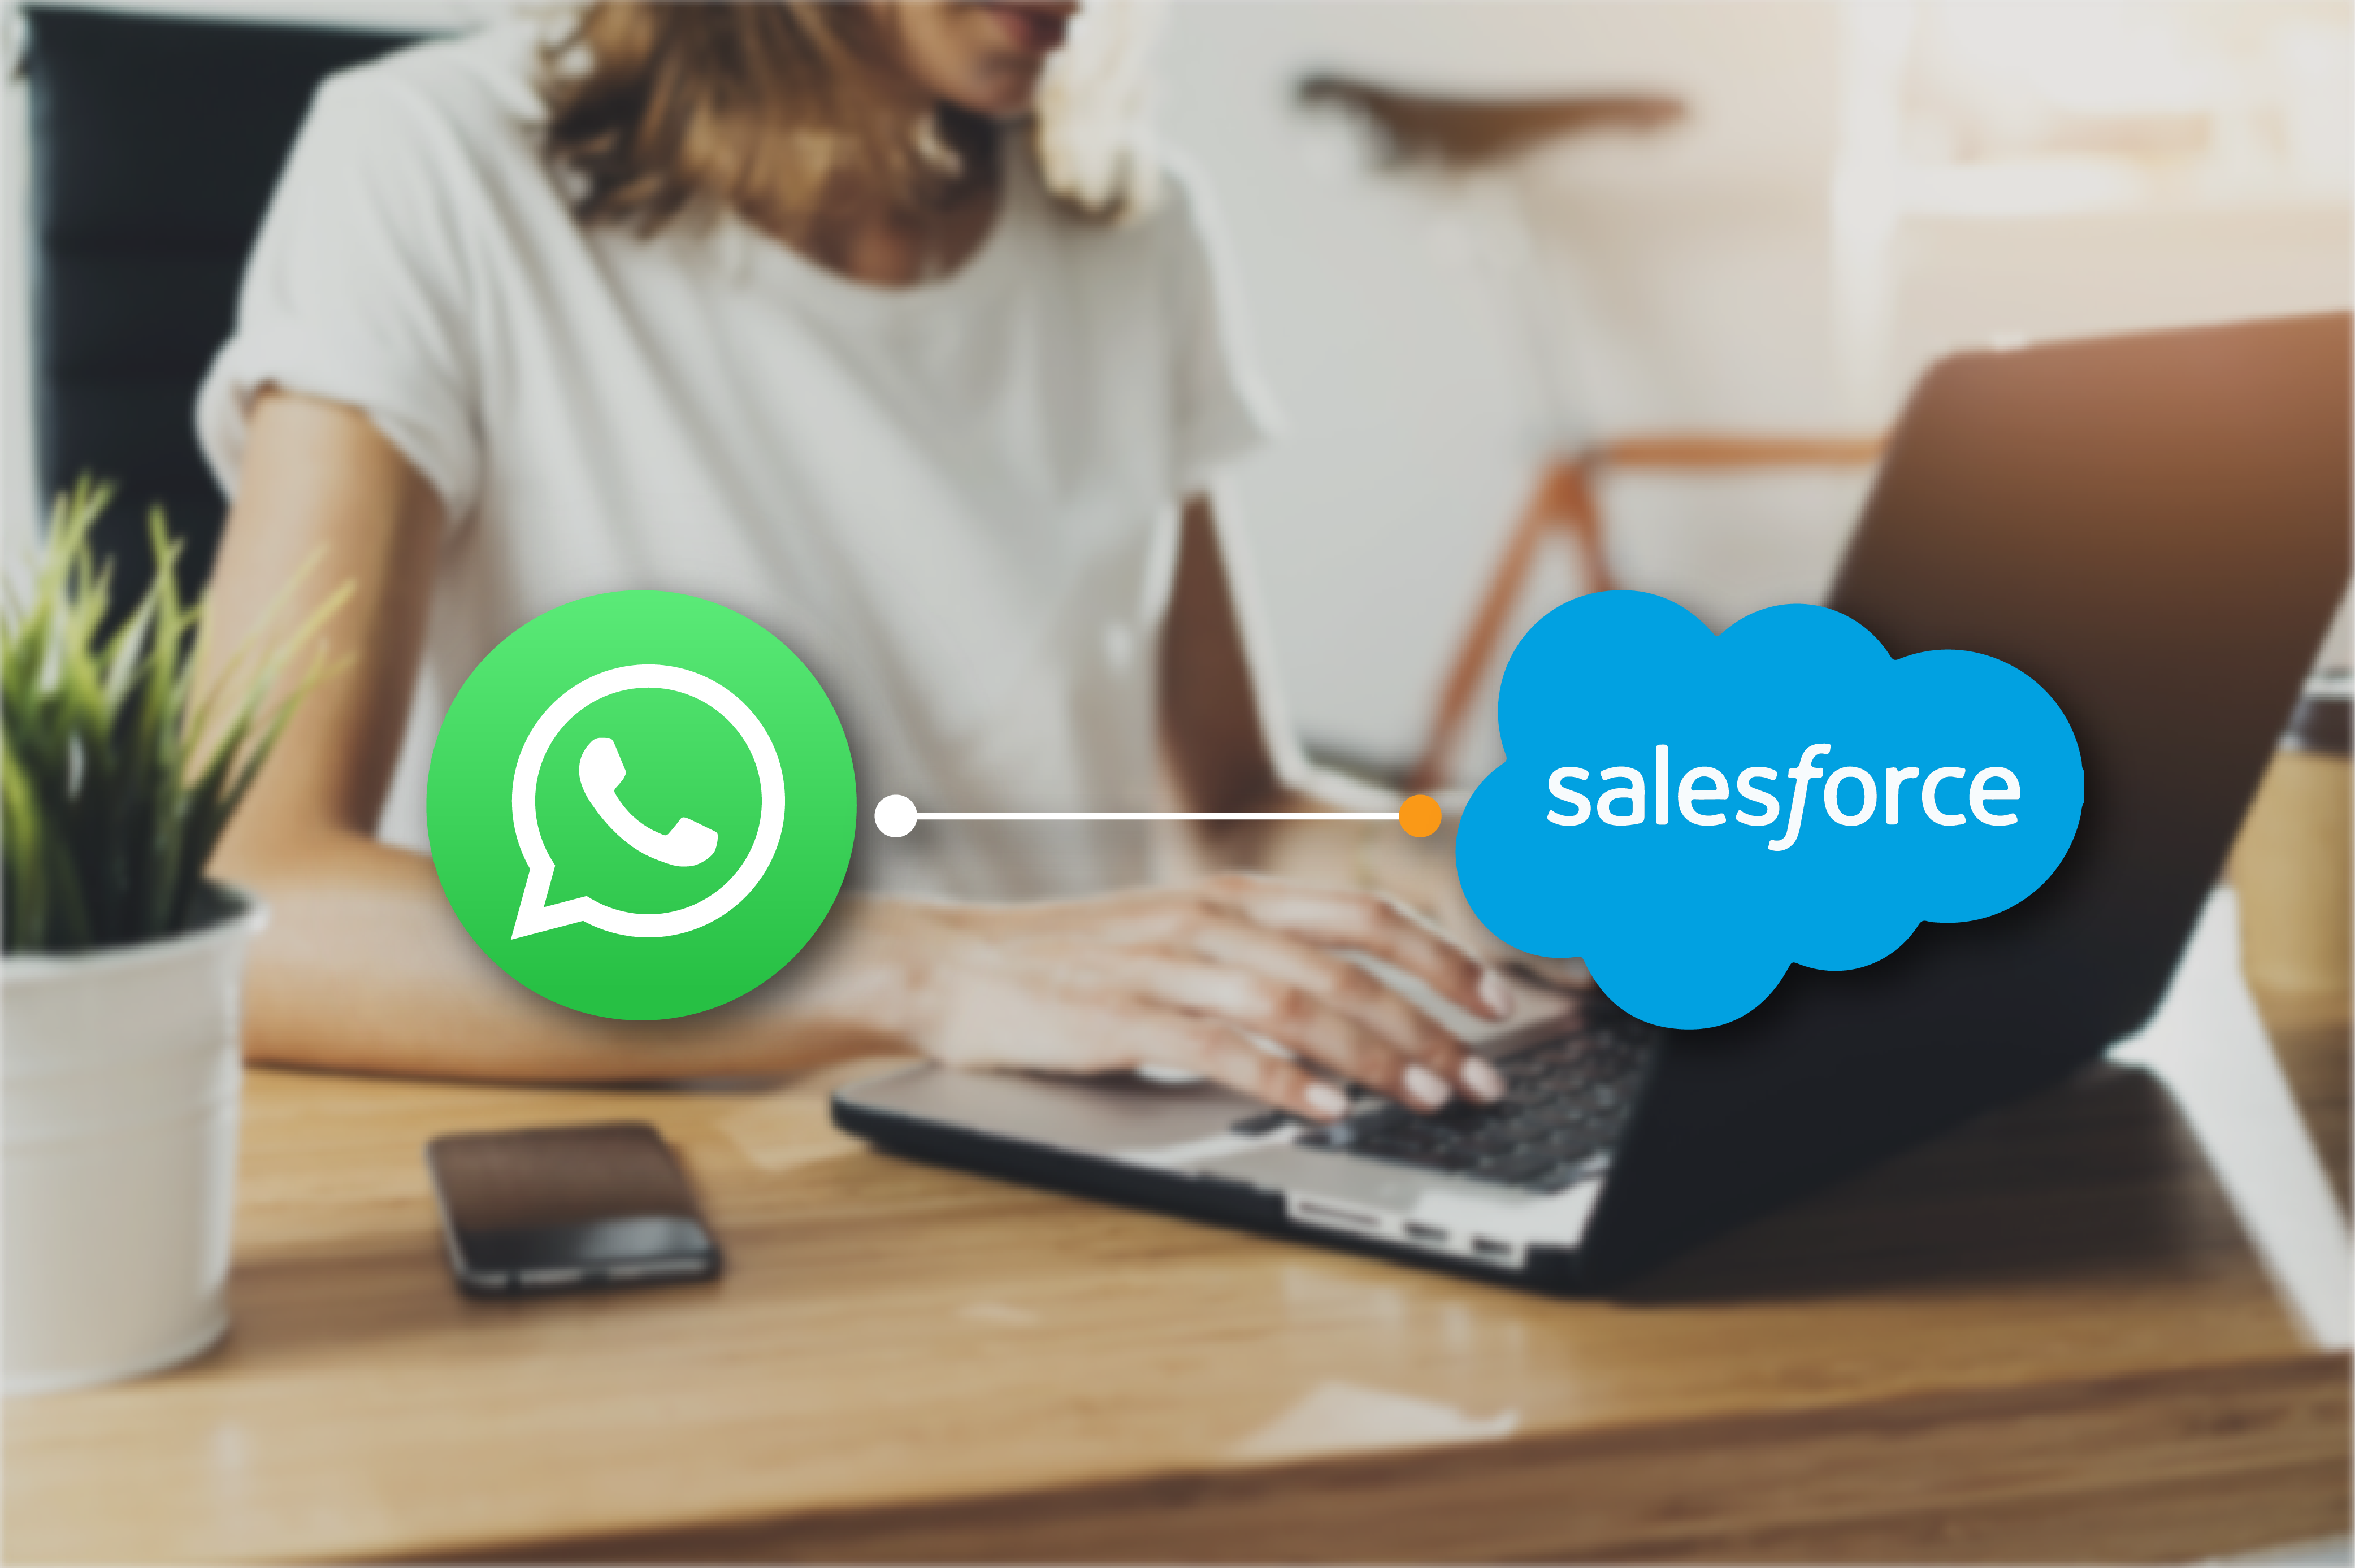 Salesforce’s integration with WhatsApp